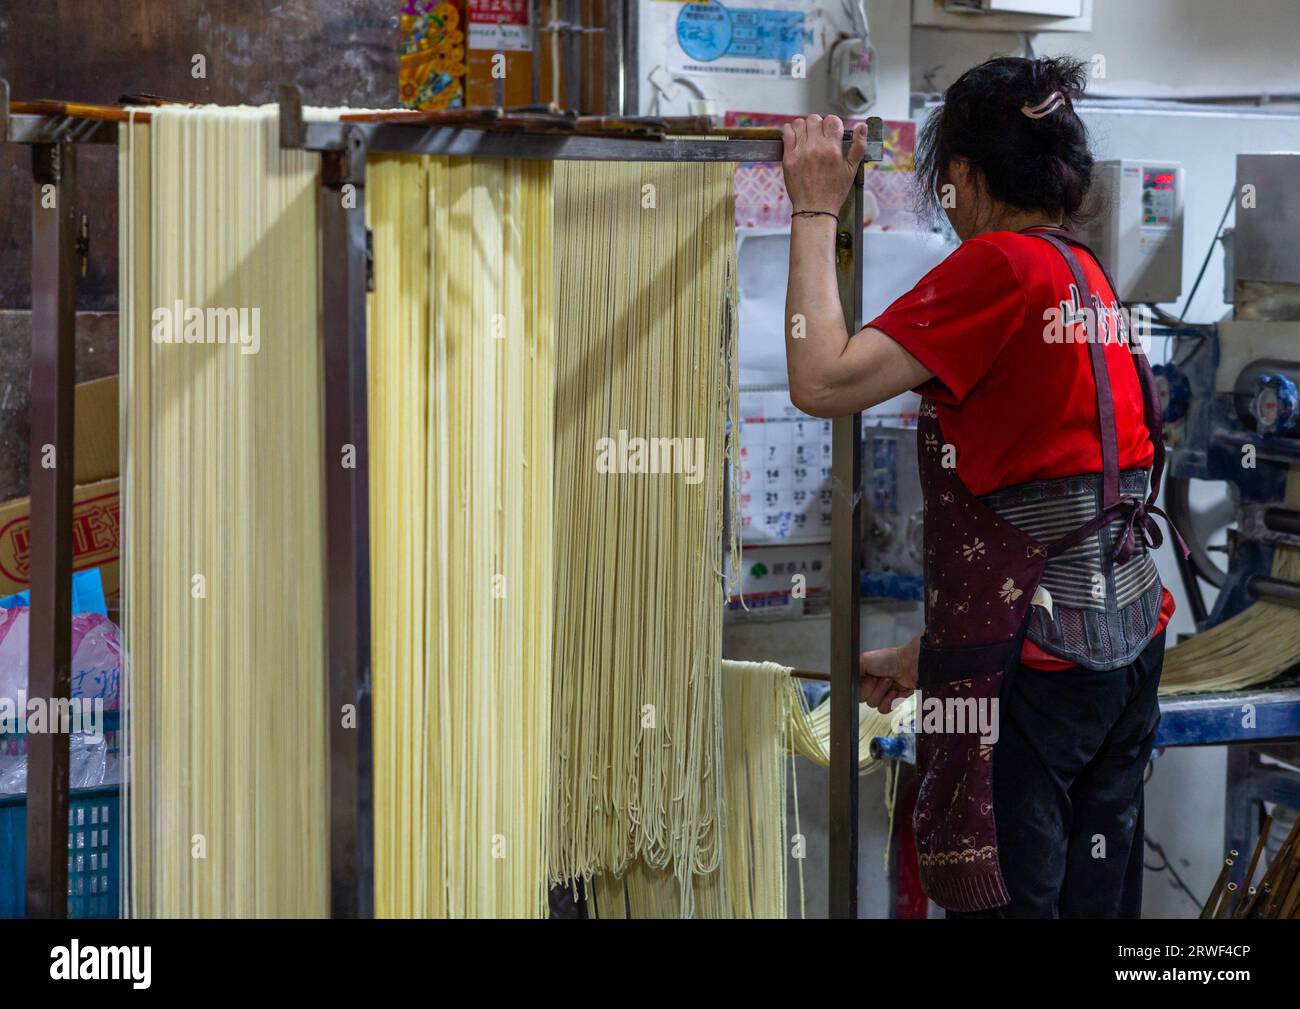 Taiwanese people hanging rice noodles in a shop, New Taipei, Tamsui, Taiwan Stock Photo